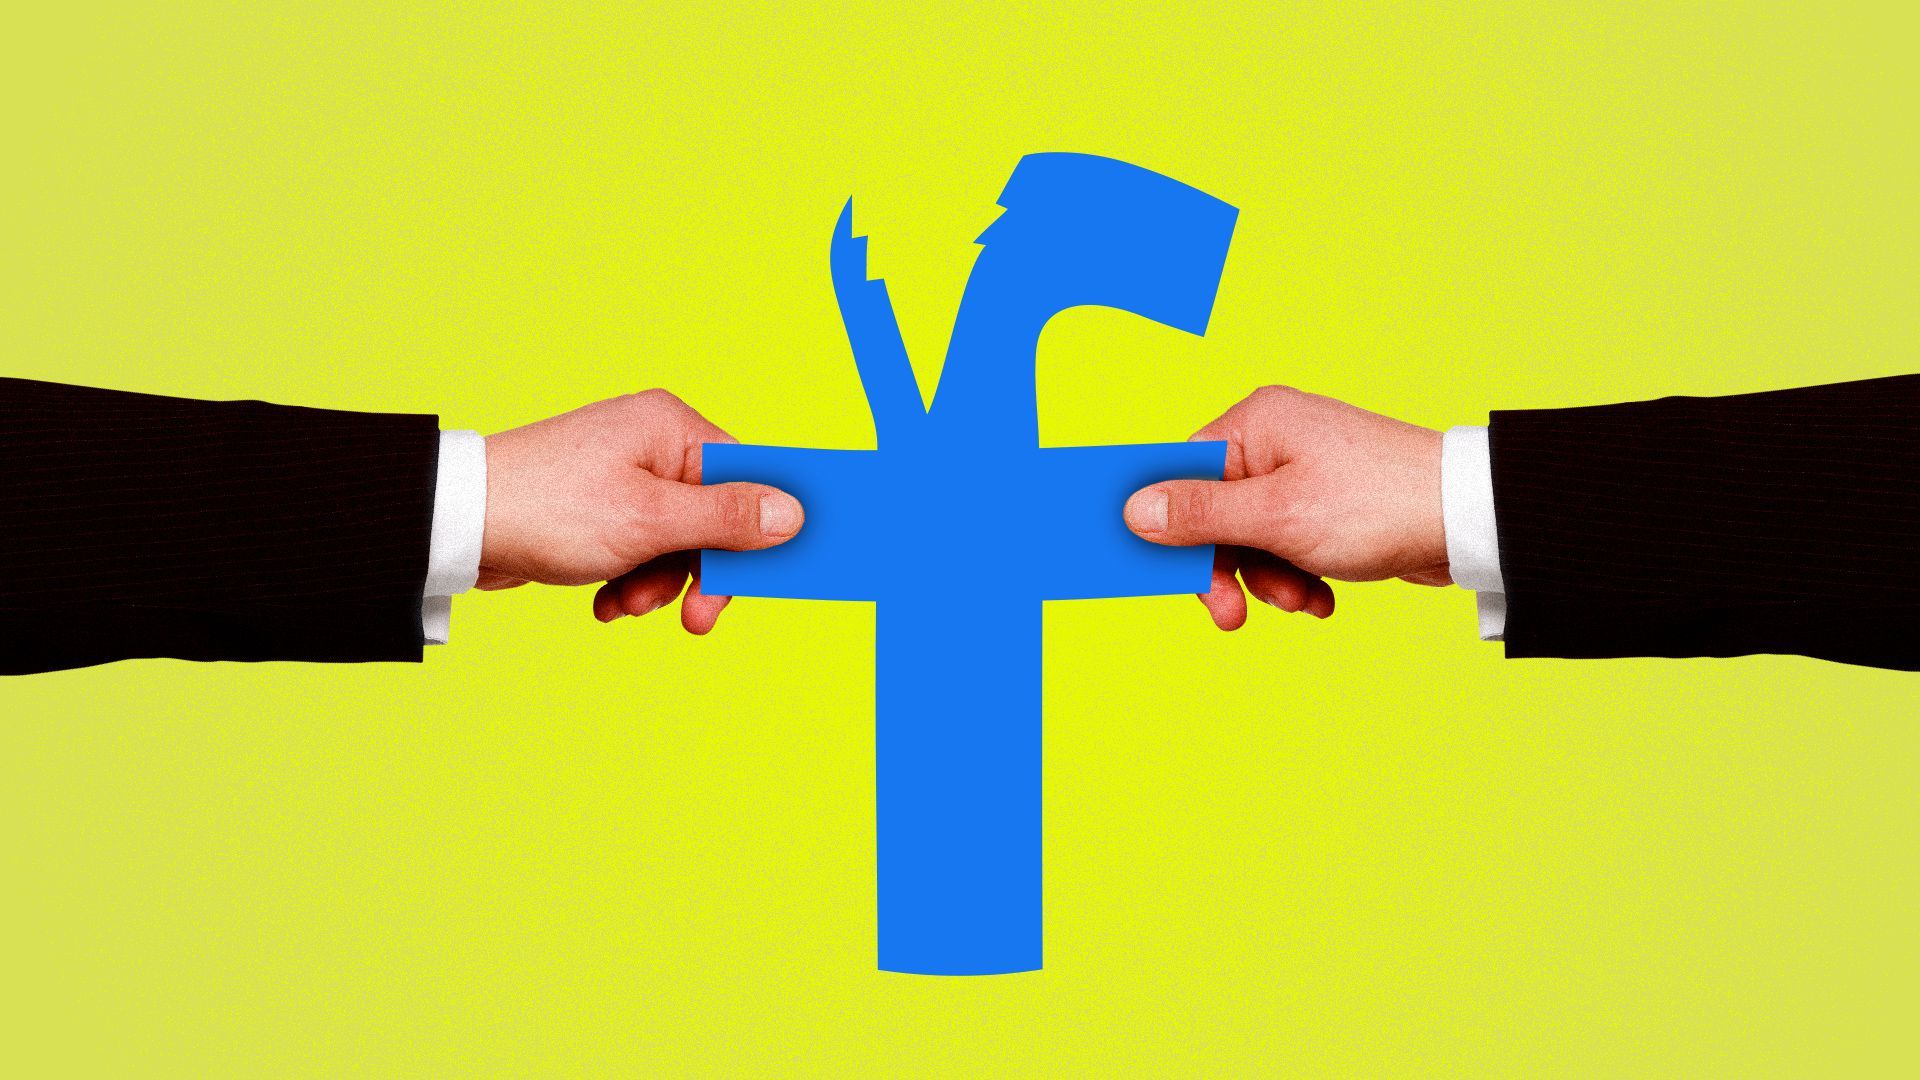 Illustration of a Facebook logo being torn in half by two hands on opposing sides of the screen.  